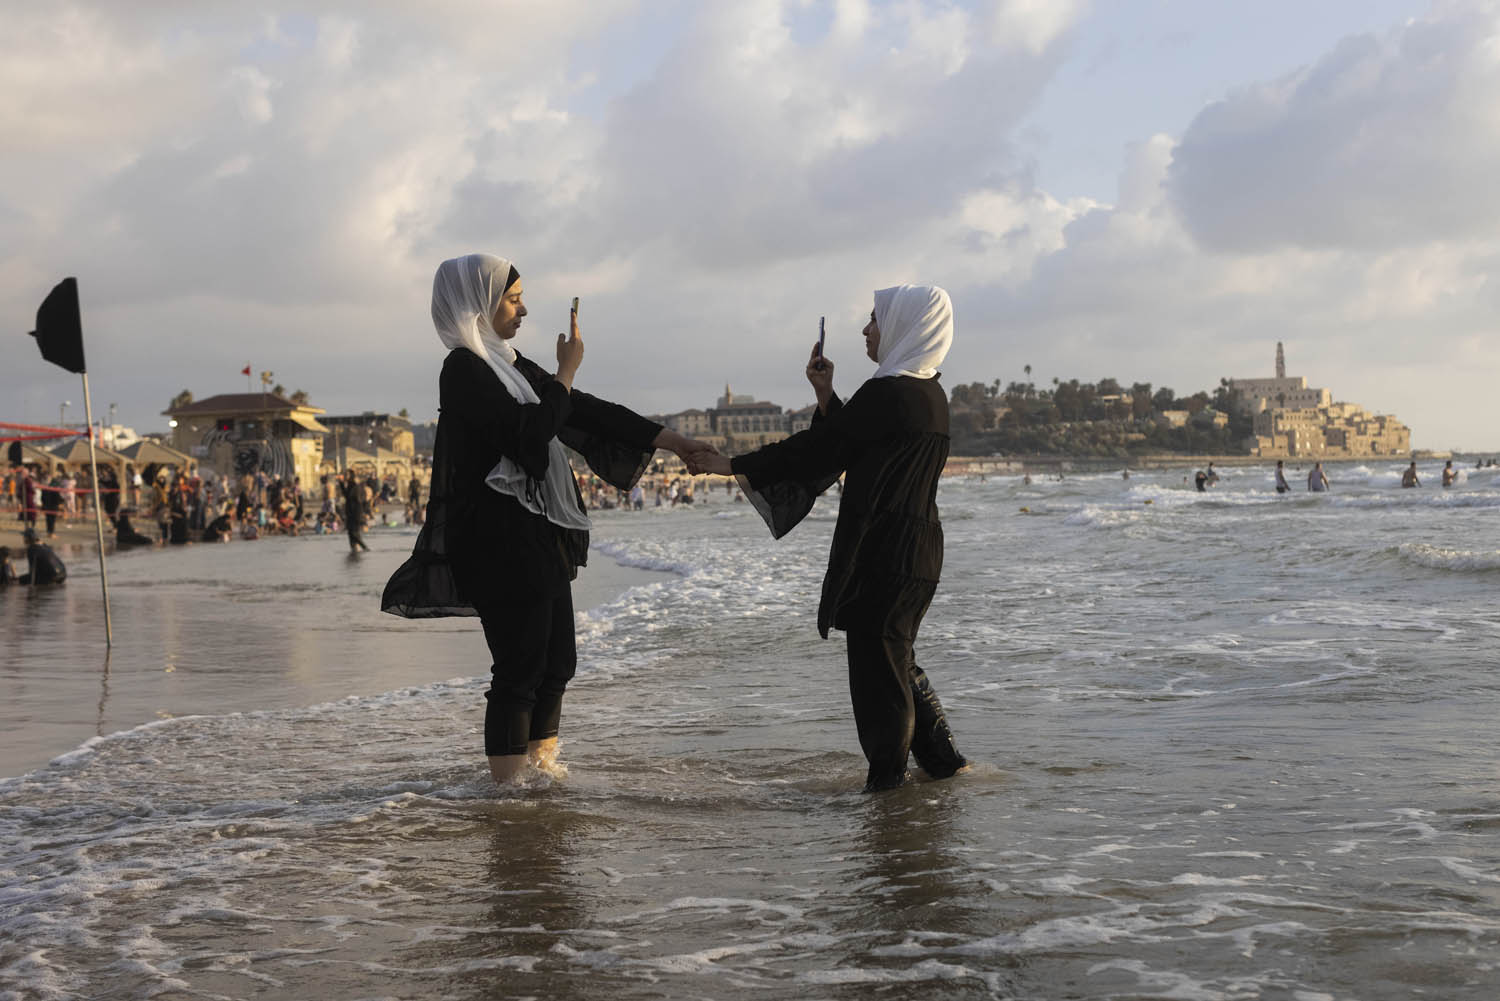 Palestinian women take photos of each other at the beach in Jaffa during the Eid al-Adha holiday, July 11, 2022. (Oren Ziv)